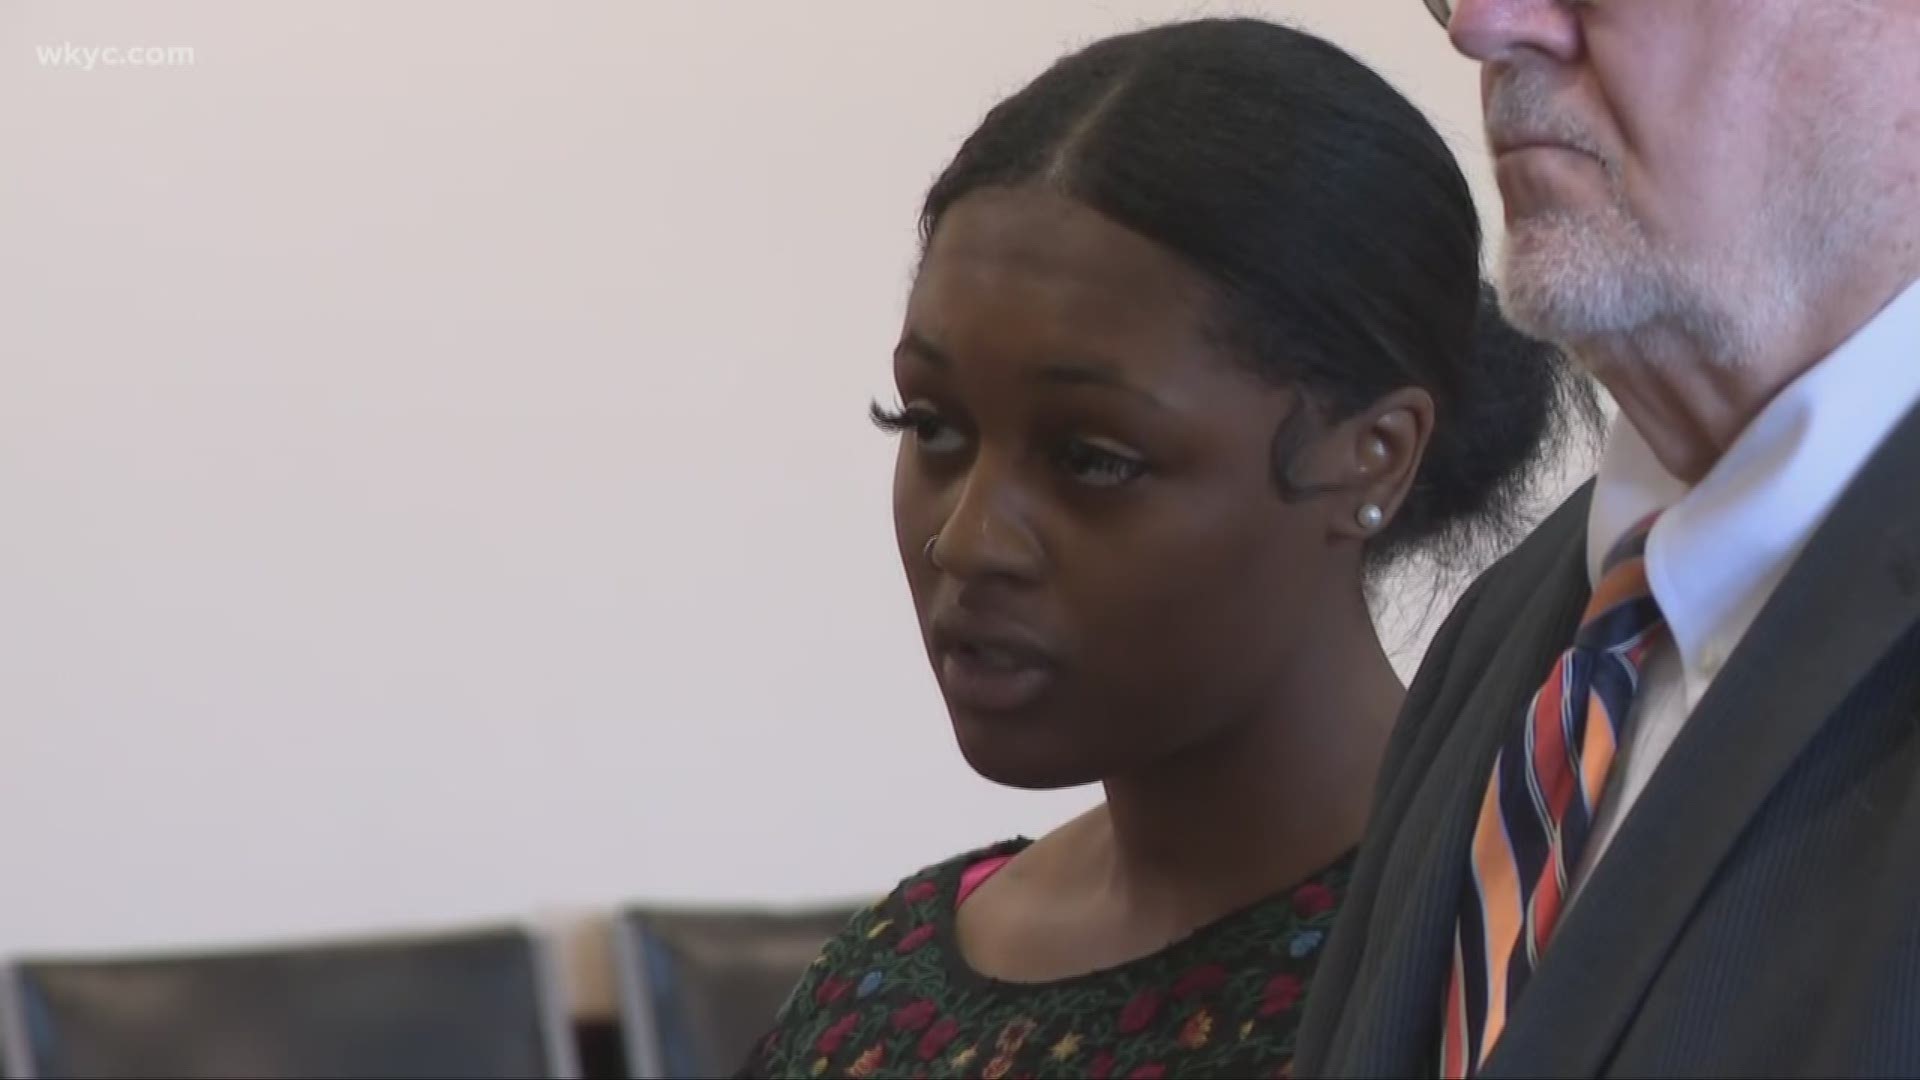 The driver who fled the scene after striking two Willowick elementary students as they got off a school bus earlier this year was in court Thursday morning to change her not guilty plea.